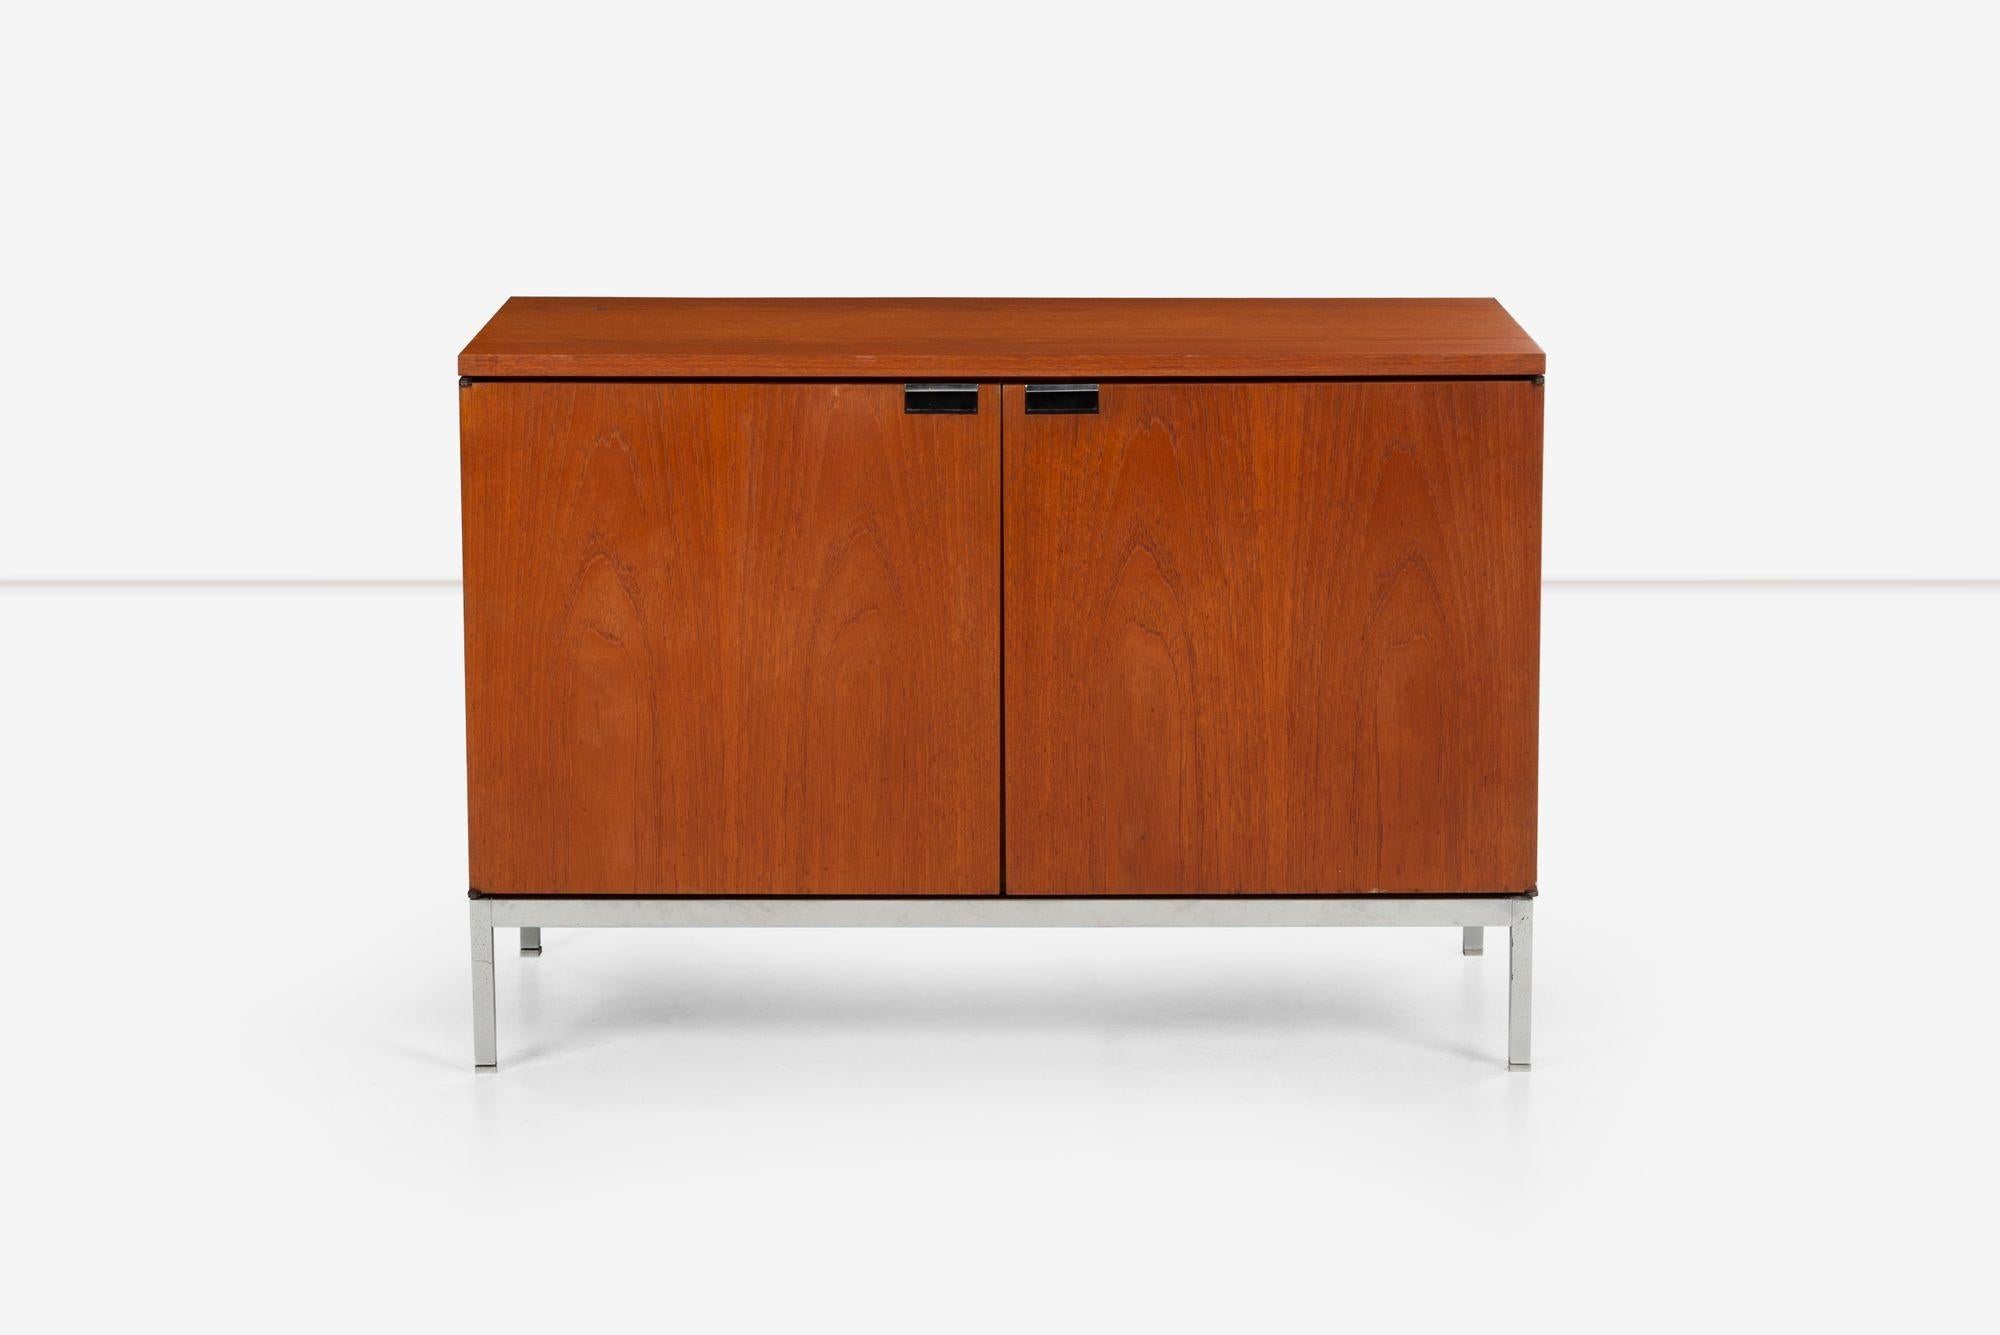 Florence Knoll two-door cabinet in Teakwood, Finished on back. Features Notch pulls with chrome details, Four file drawers and Four pencil drawers, and chrome-plated adjustable feet.
[Knoll label on underside 1976 stamp].